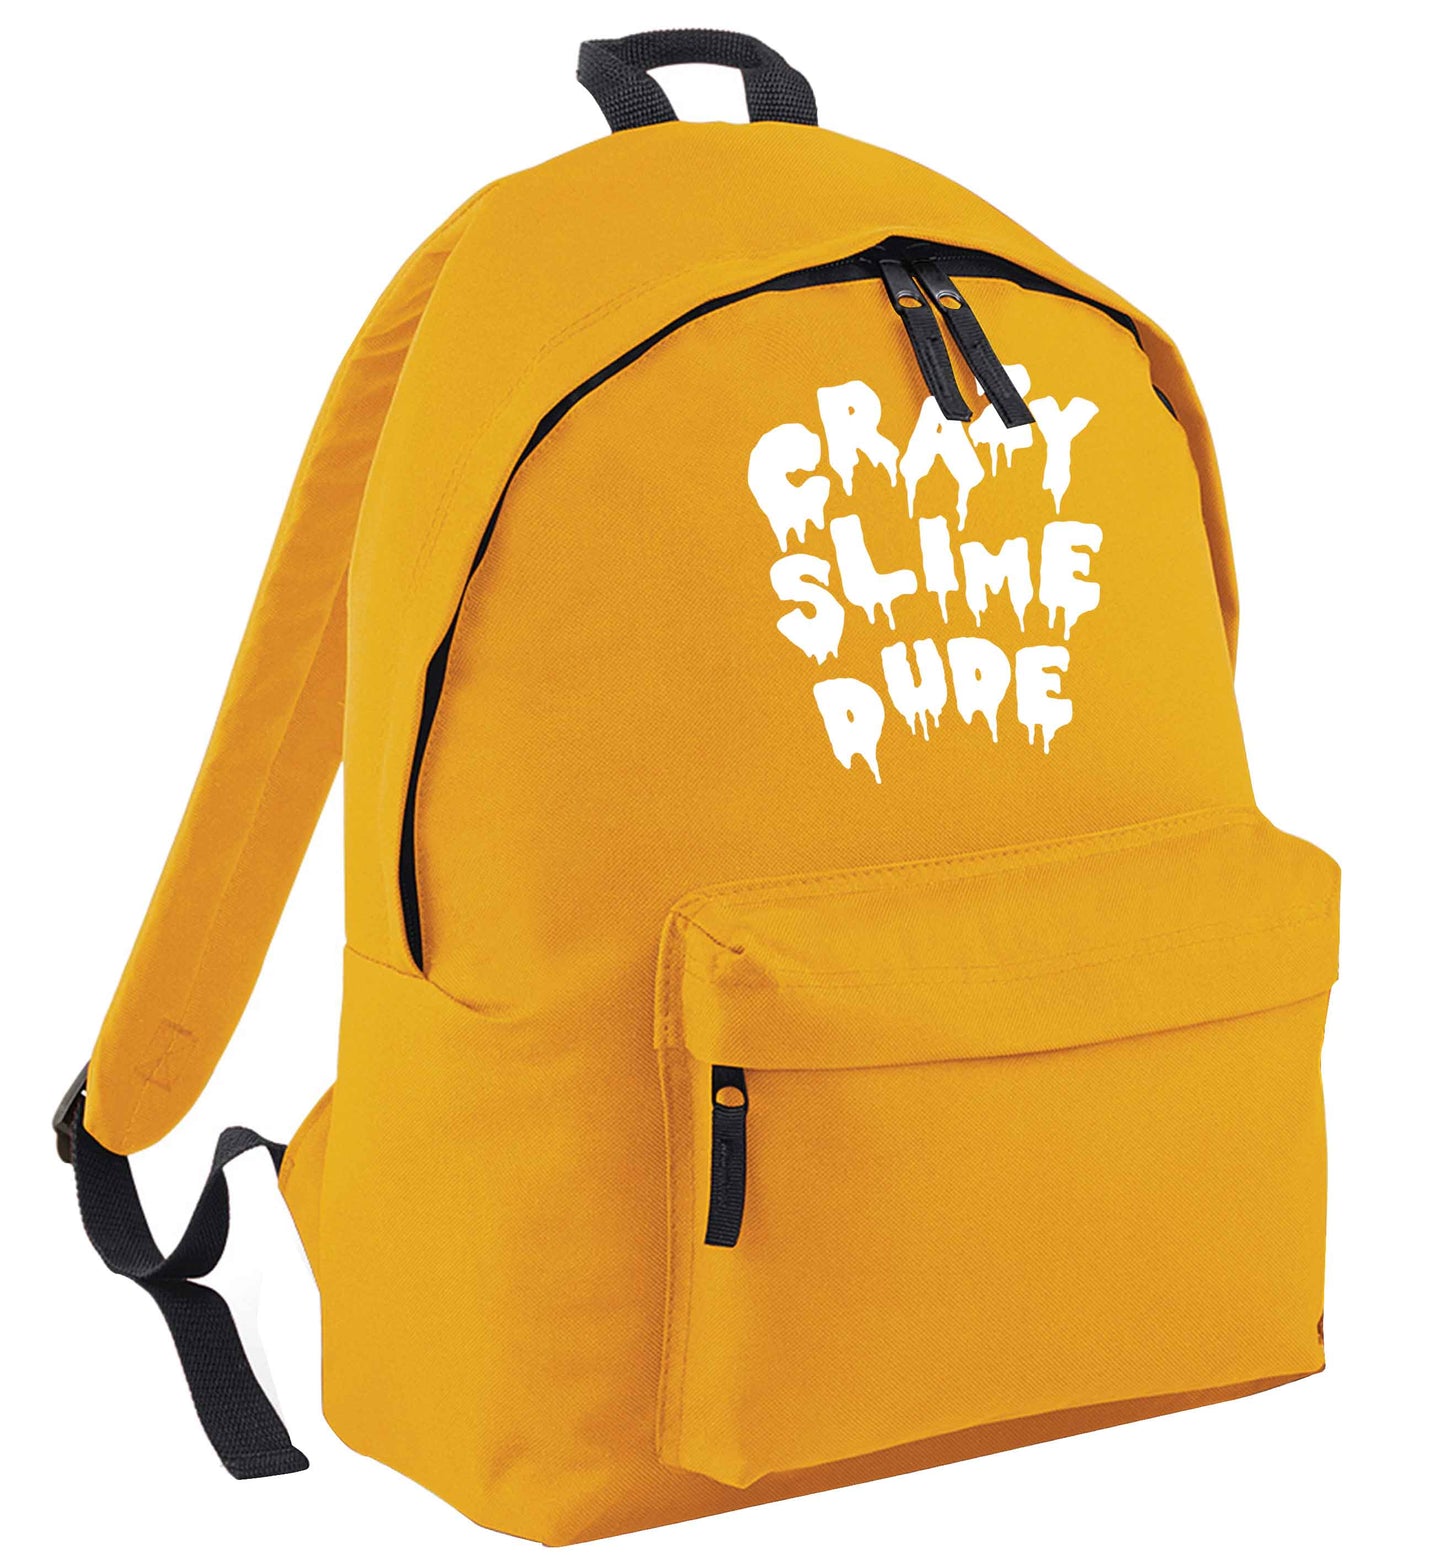 Crazy slime dude mustard adults backpack